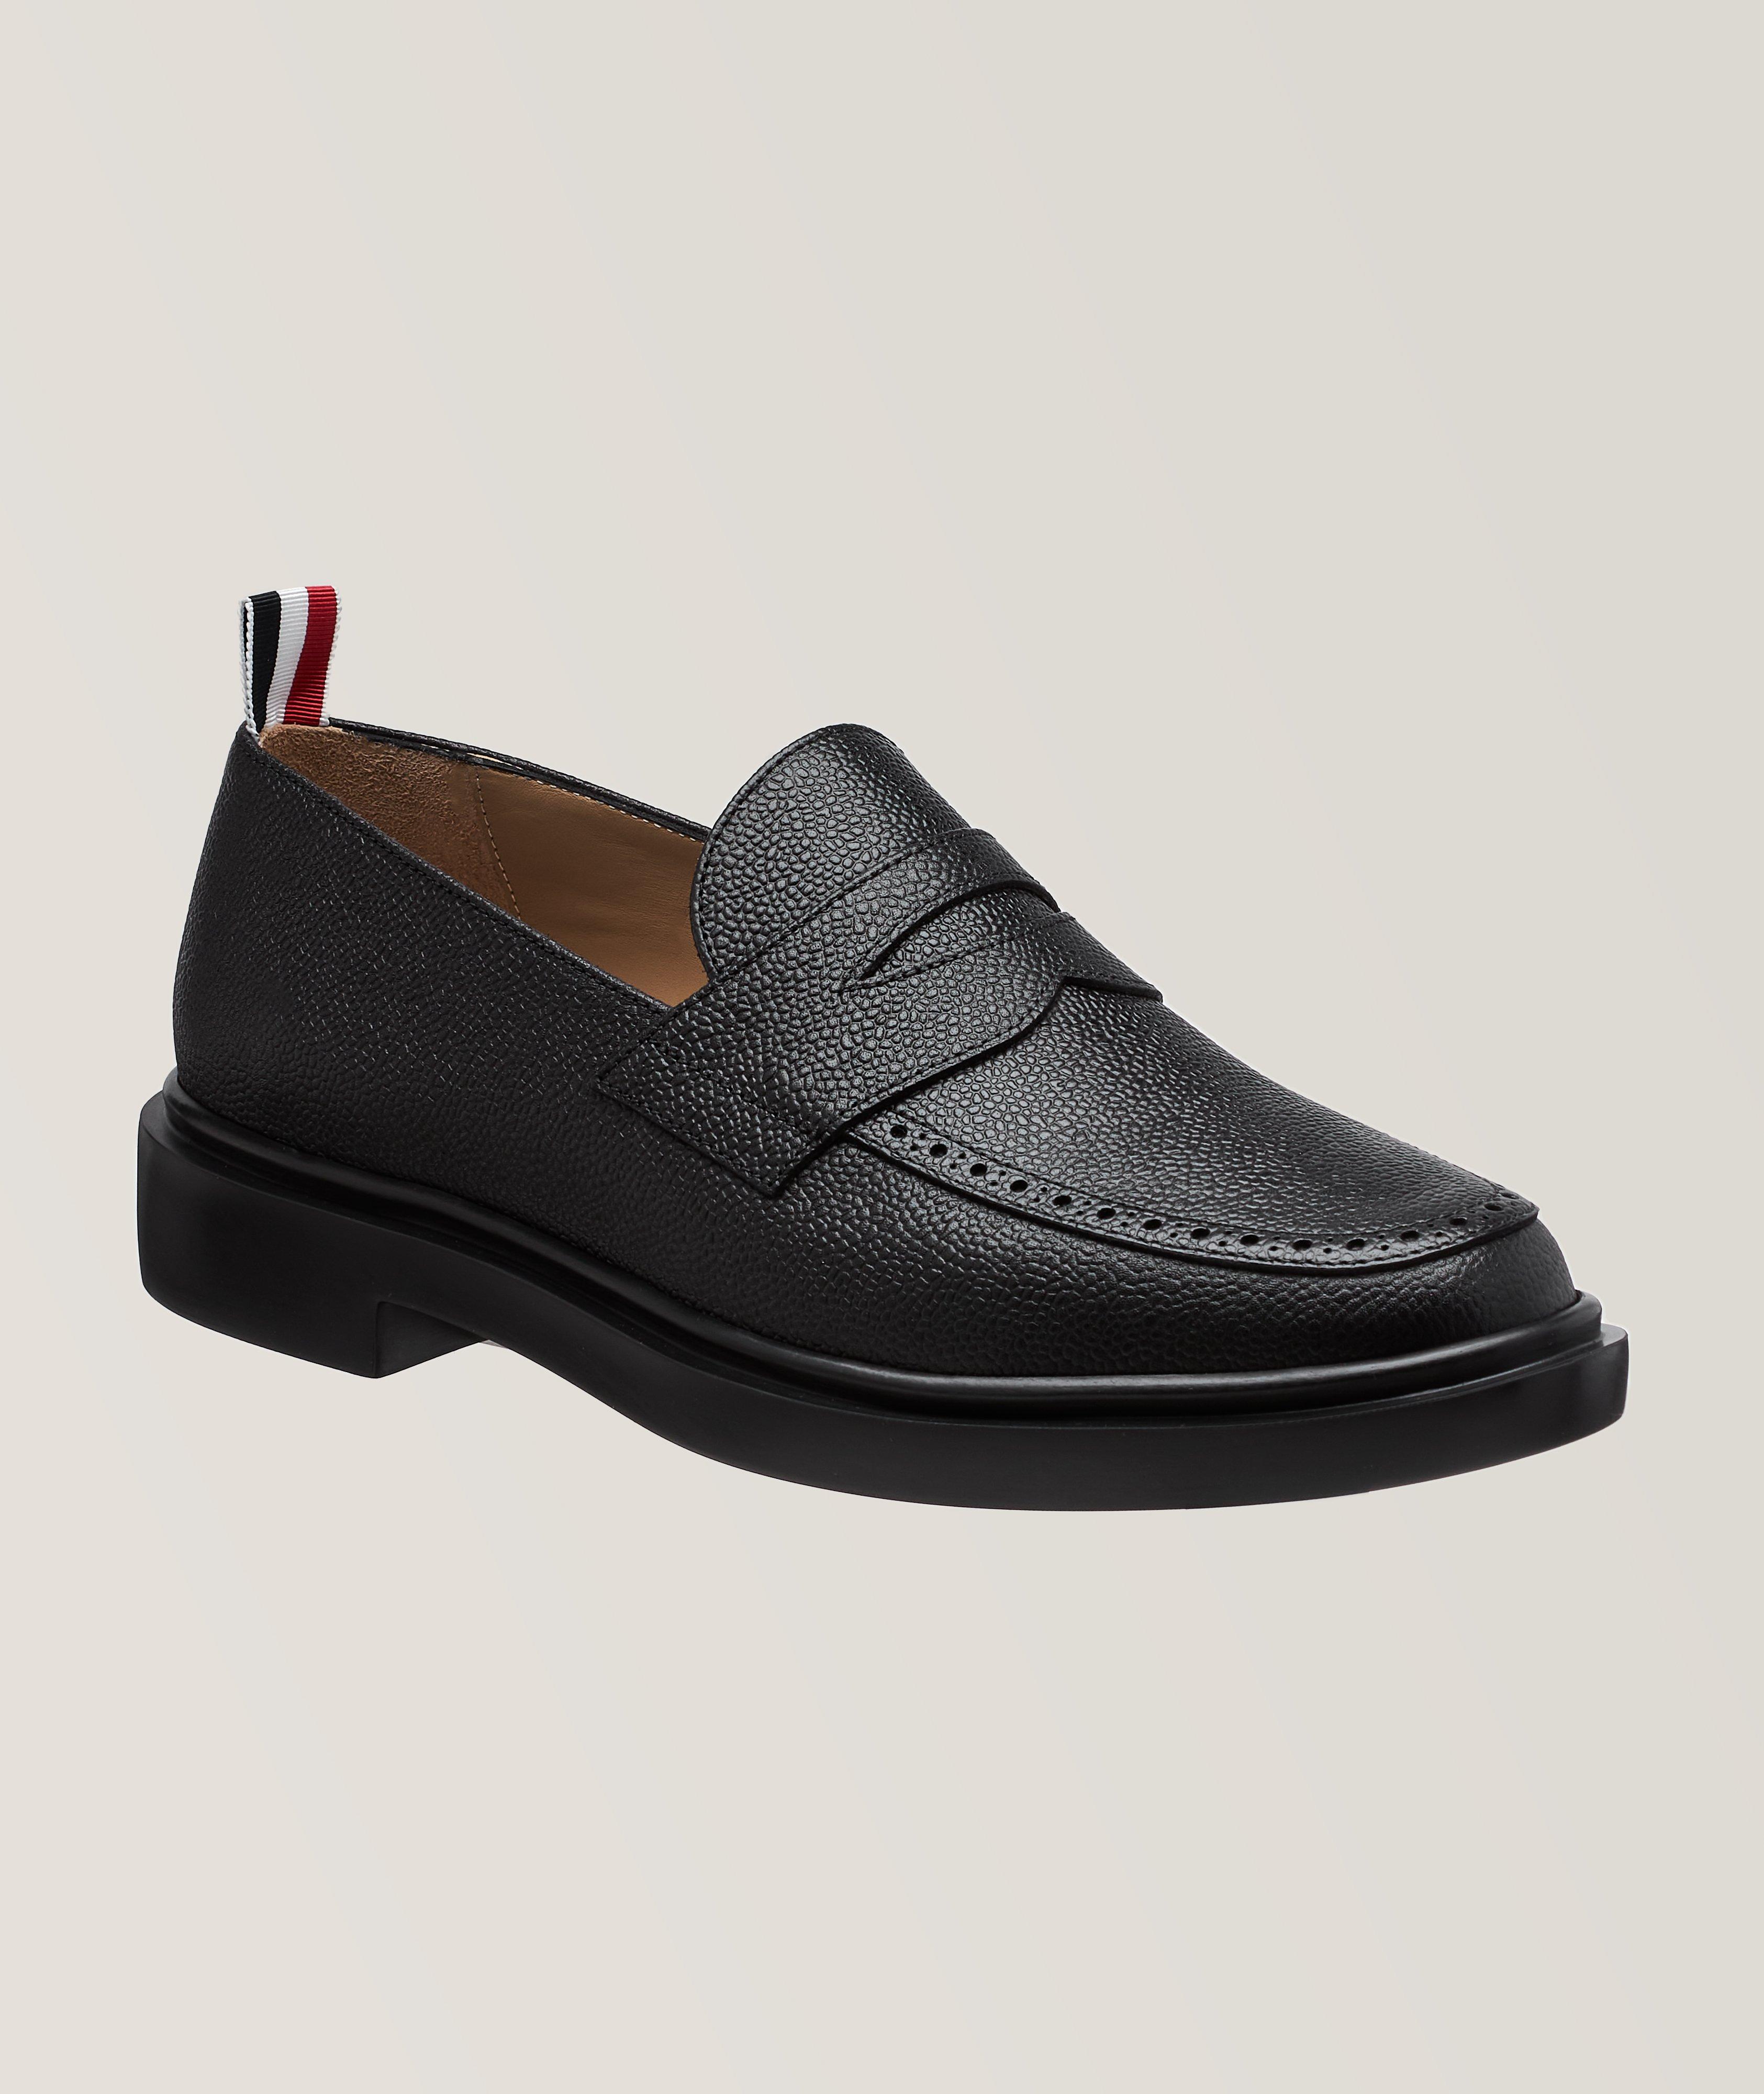 Thom Browne Tonal Pebble Grain Leather Penny Loafers 